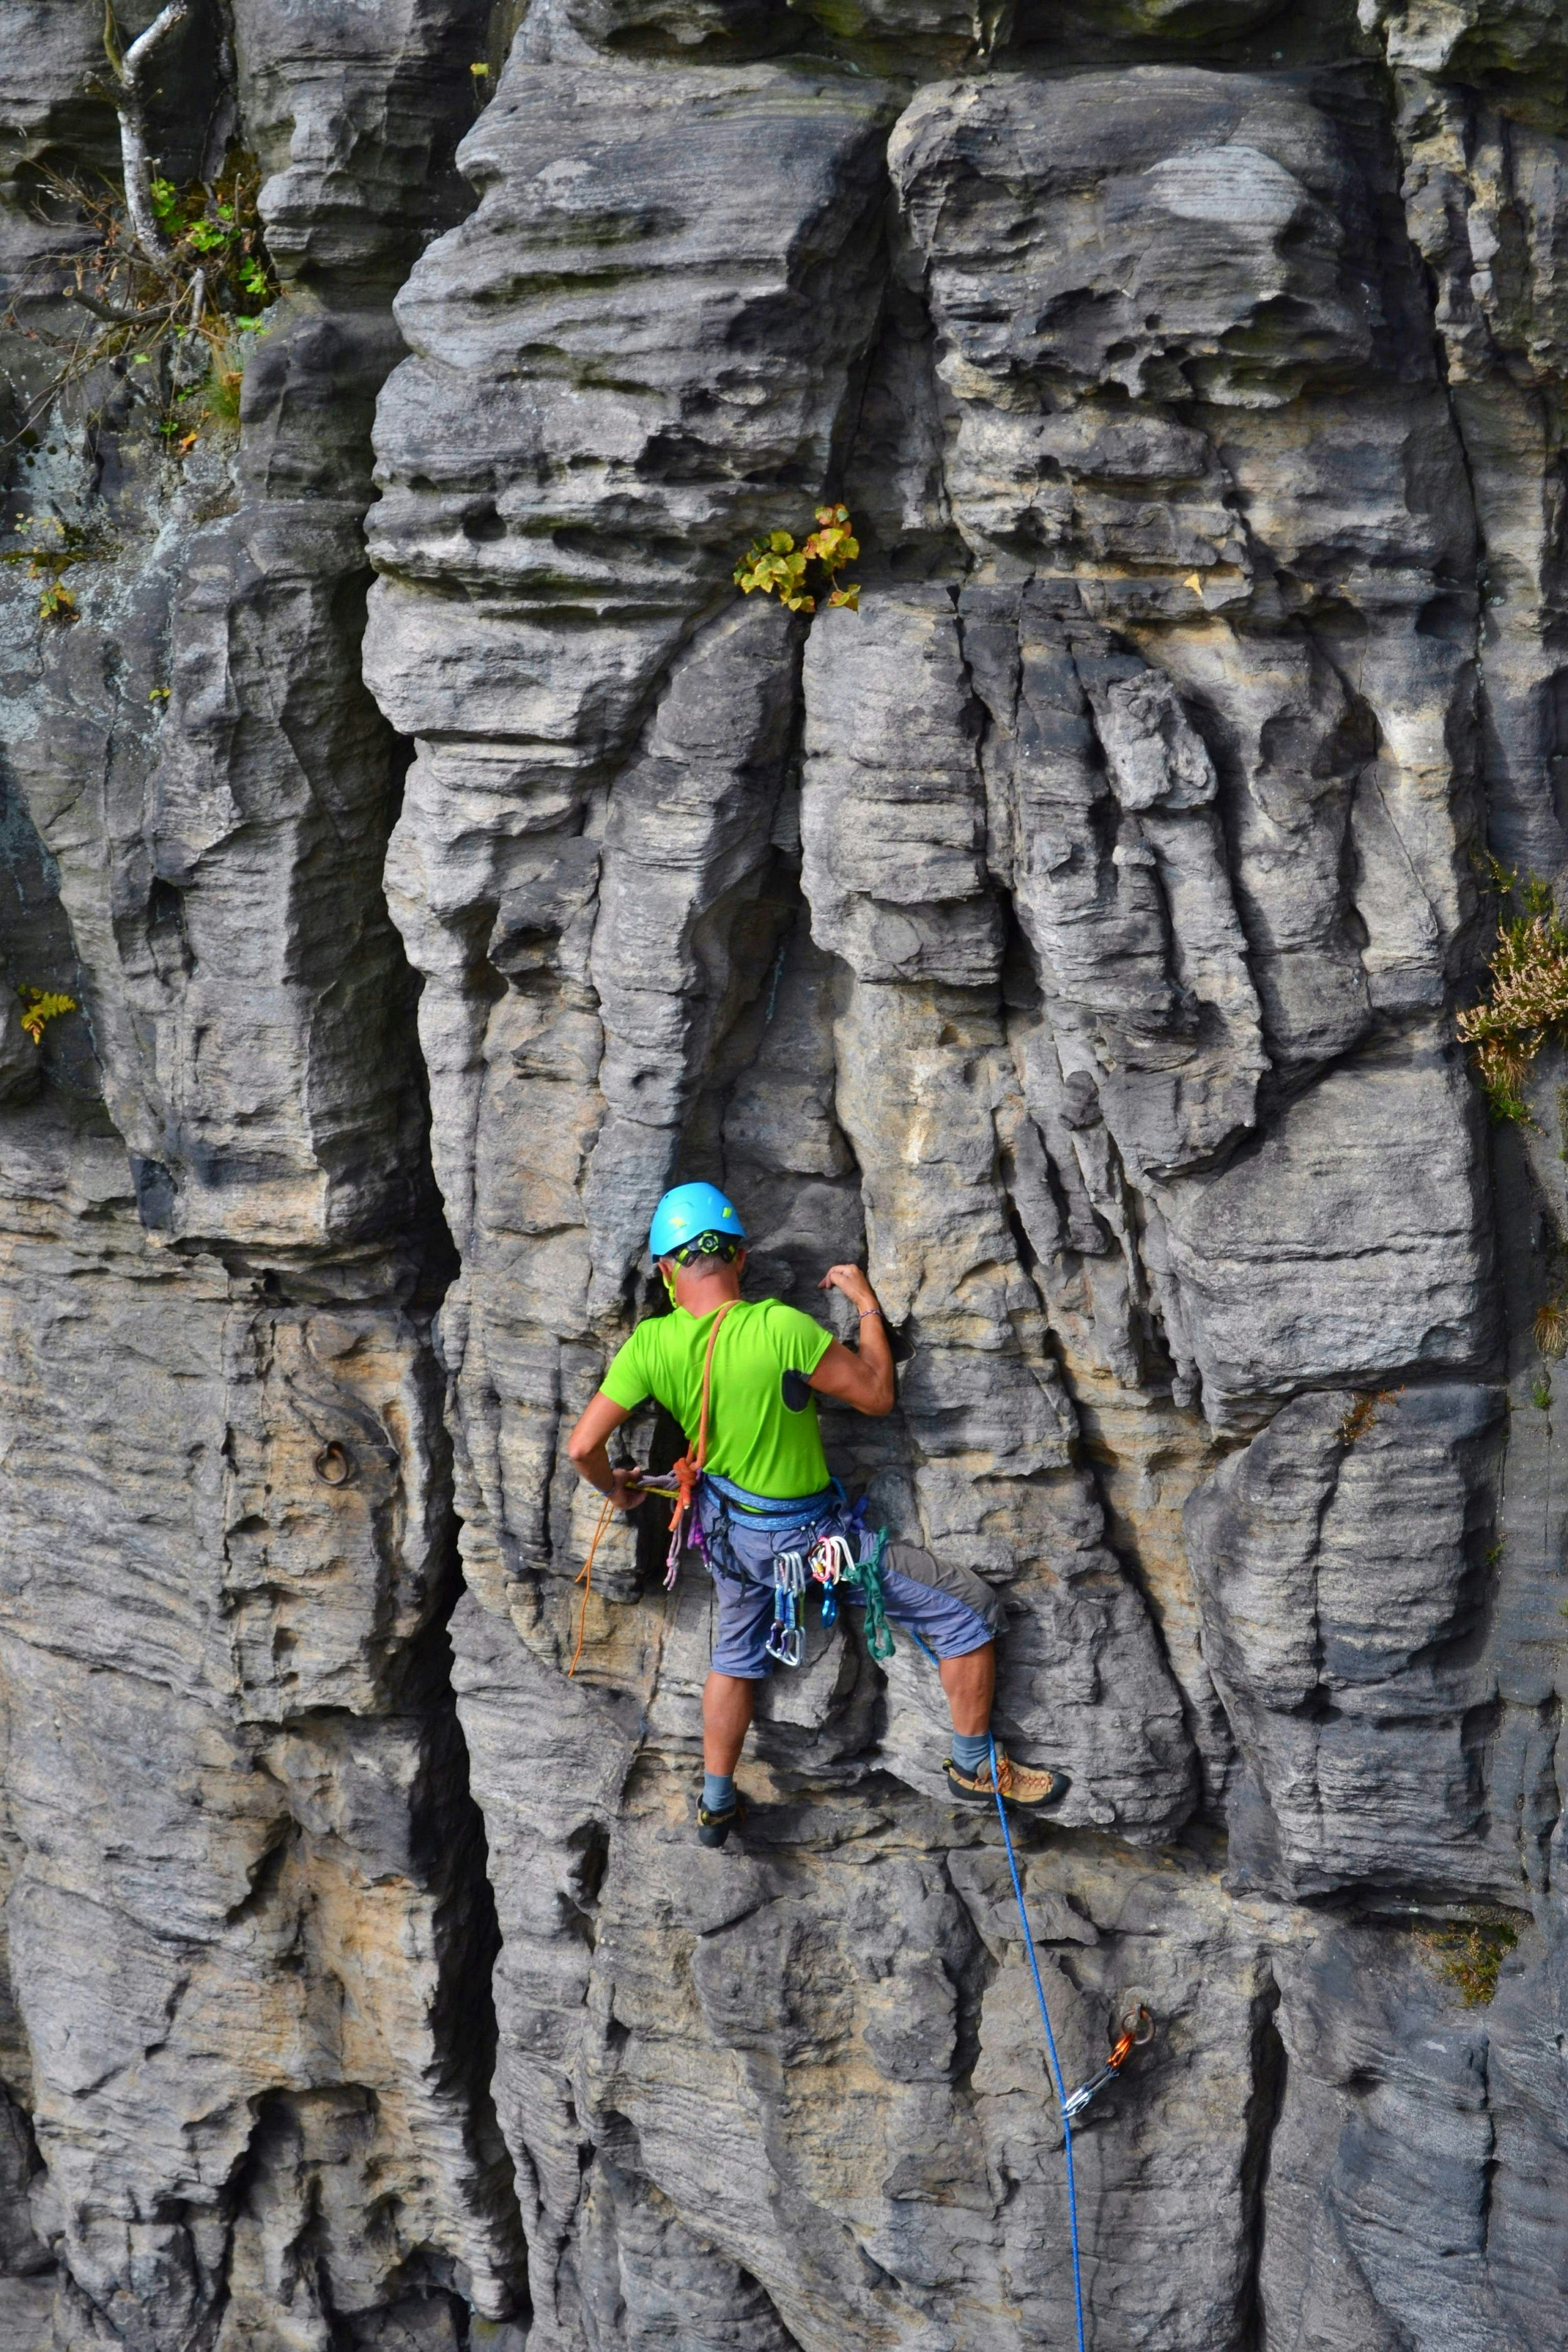 A climber in a bright green t-shirt and sky-blue helmet clings to a rock face that is full of cracks and crevices. 